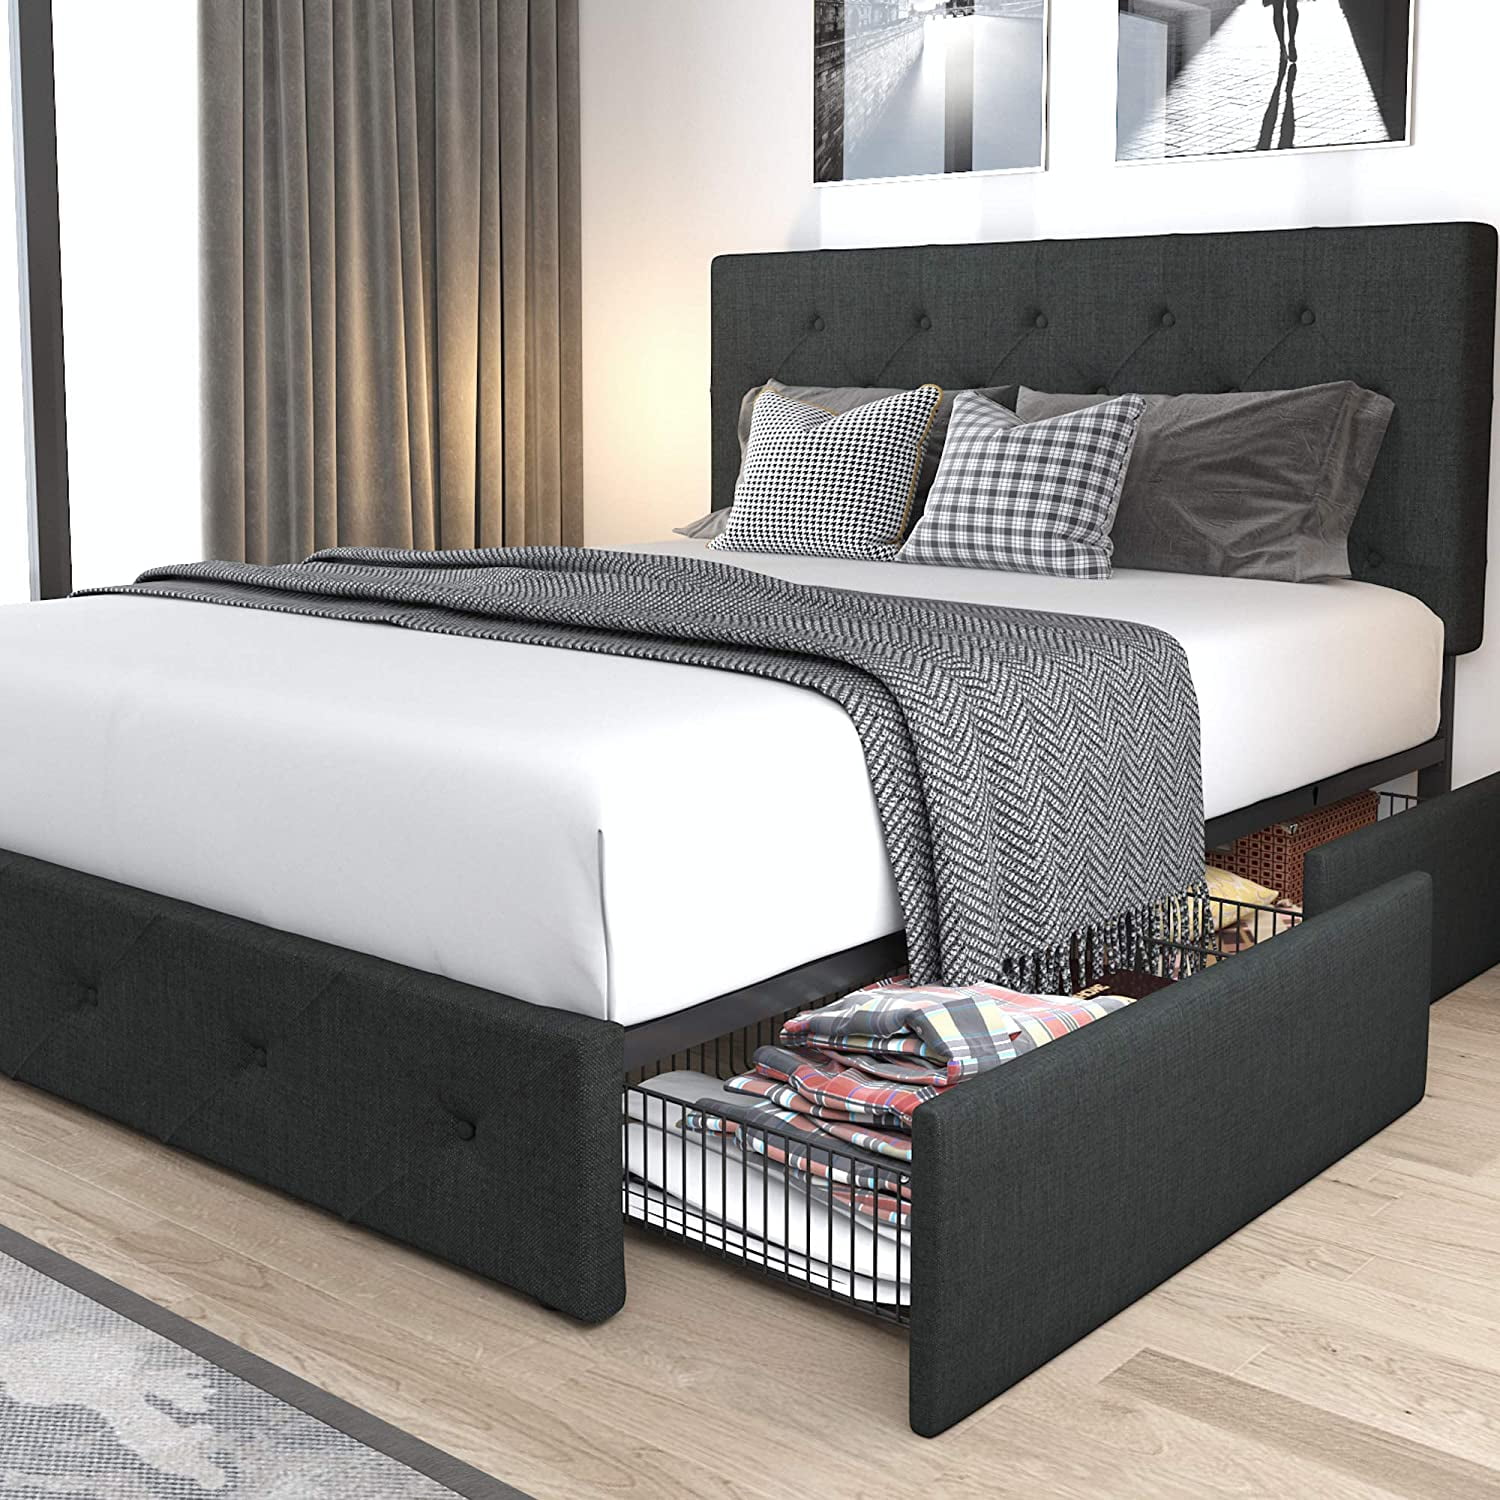 Allewie Queen Platform Bed Frame with 20 Drawers Storage and Headboard,  Diamond Stitched Button Tufted Upholstered Mattress Foundation with Wood  Slat ...